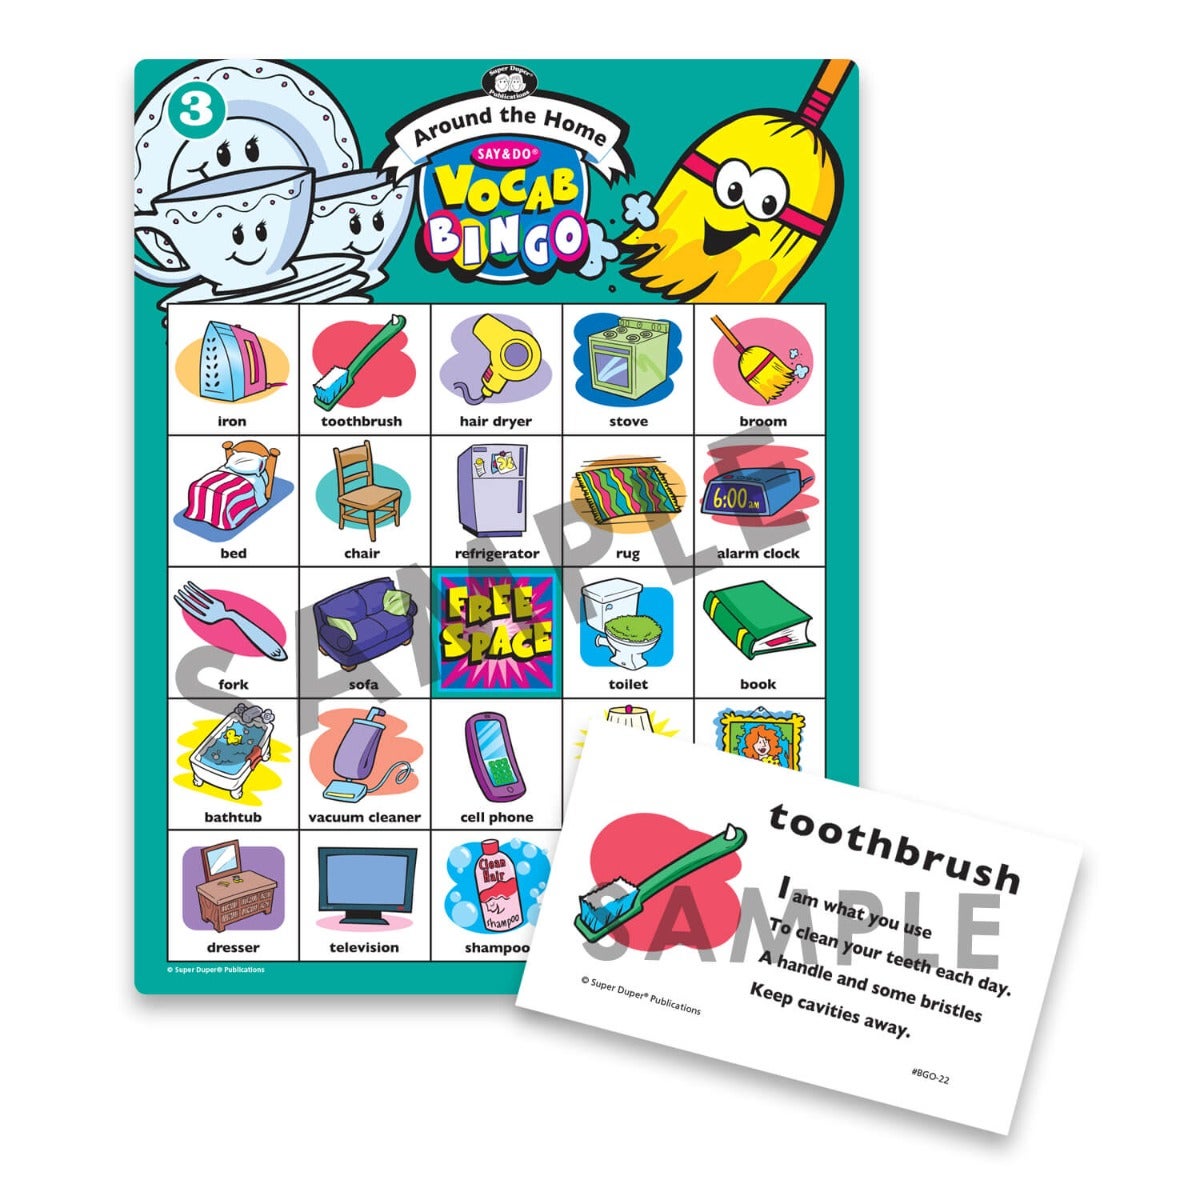 Say & Do® Vocab Bingo, vocabulary learning game for children and students, around the home game board